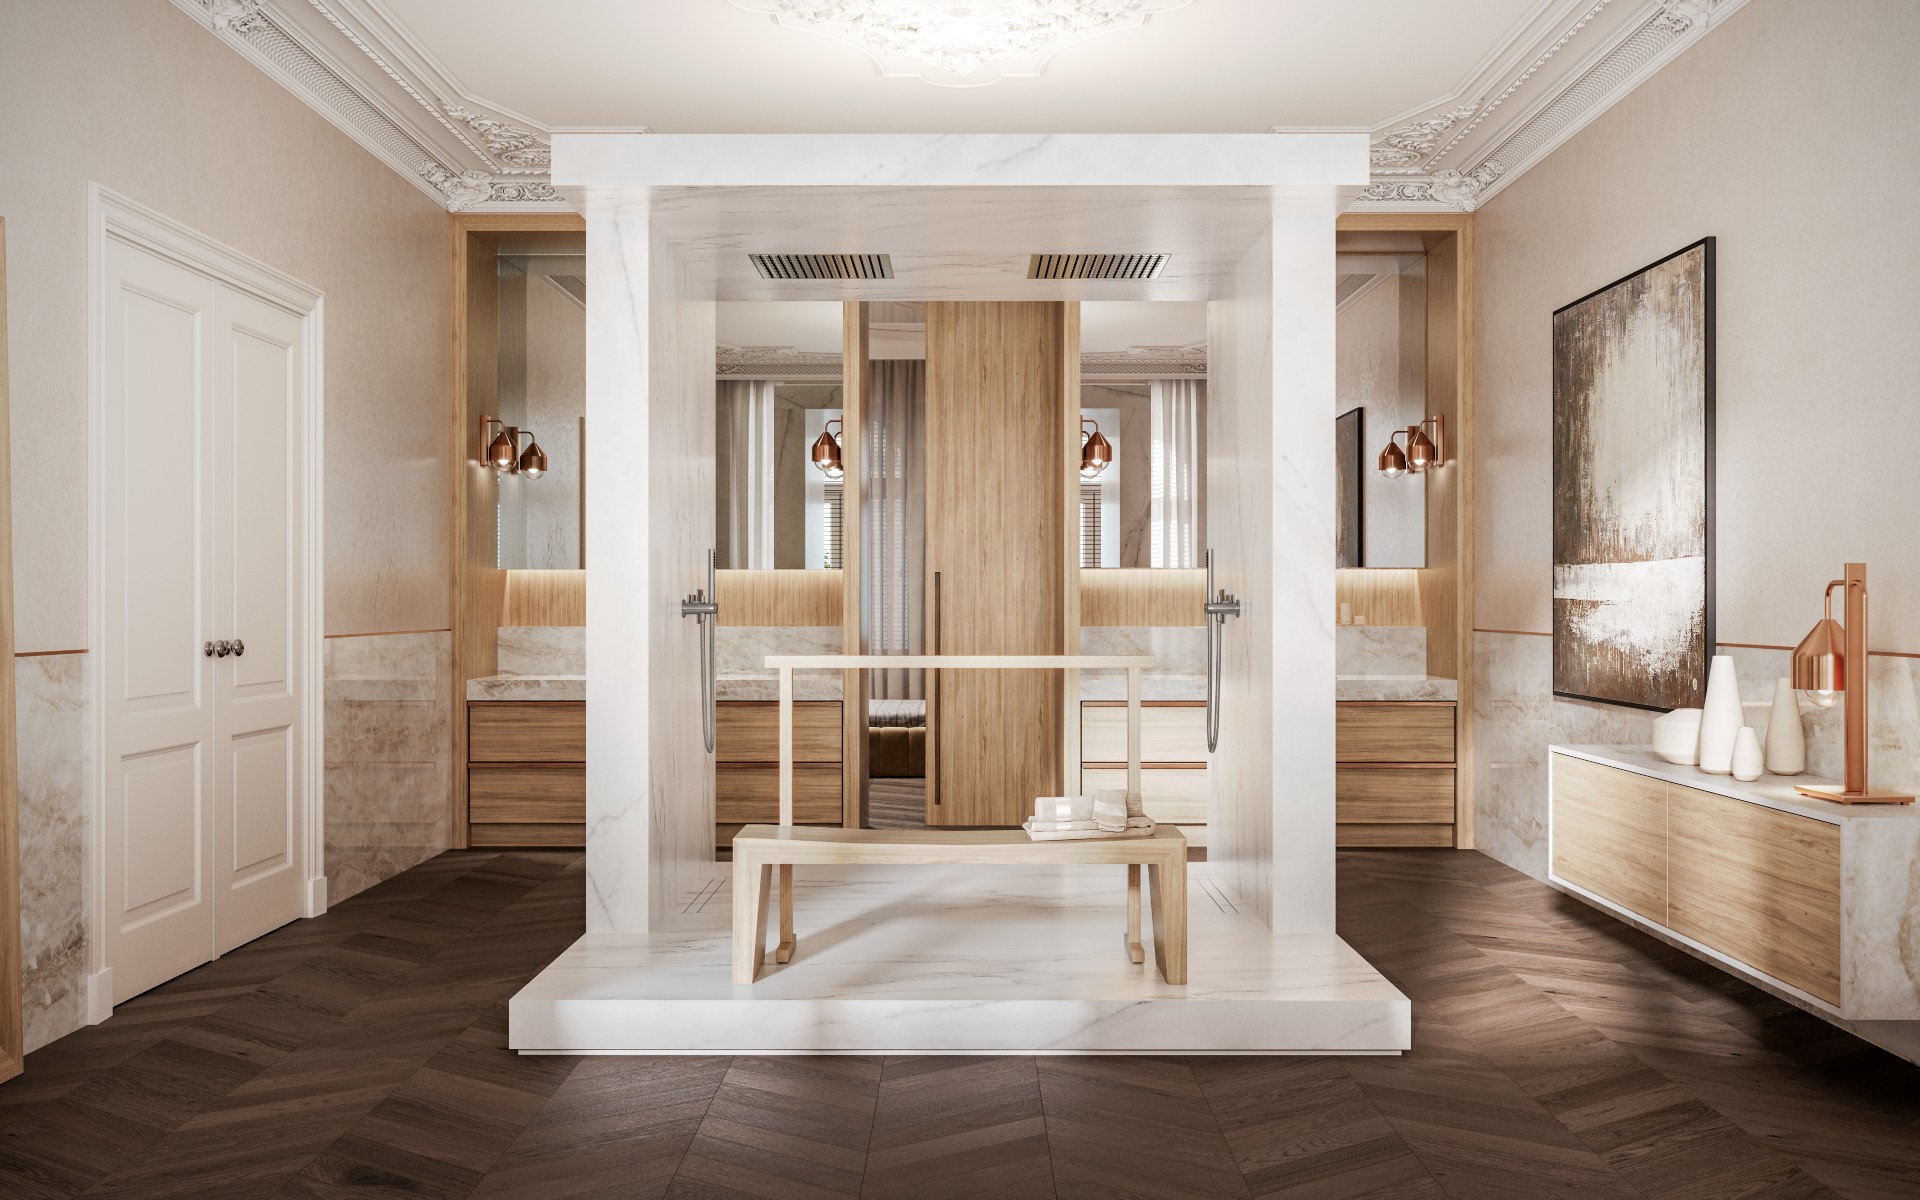 Image of THE PALAZZO IMÁGEN GENERAL in The Collage: harmony in chaos defines this bathroom designed by Colin Seah - Cosentino